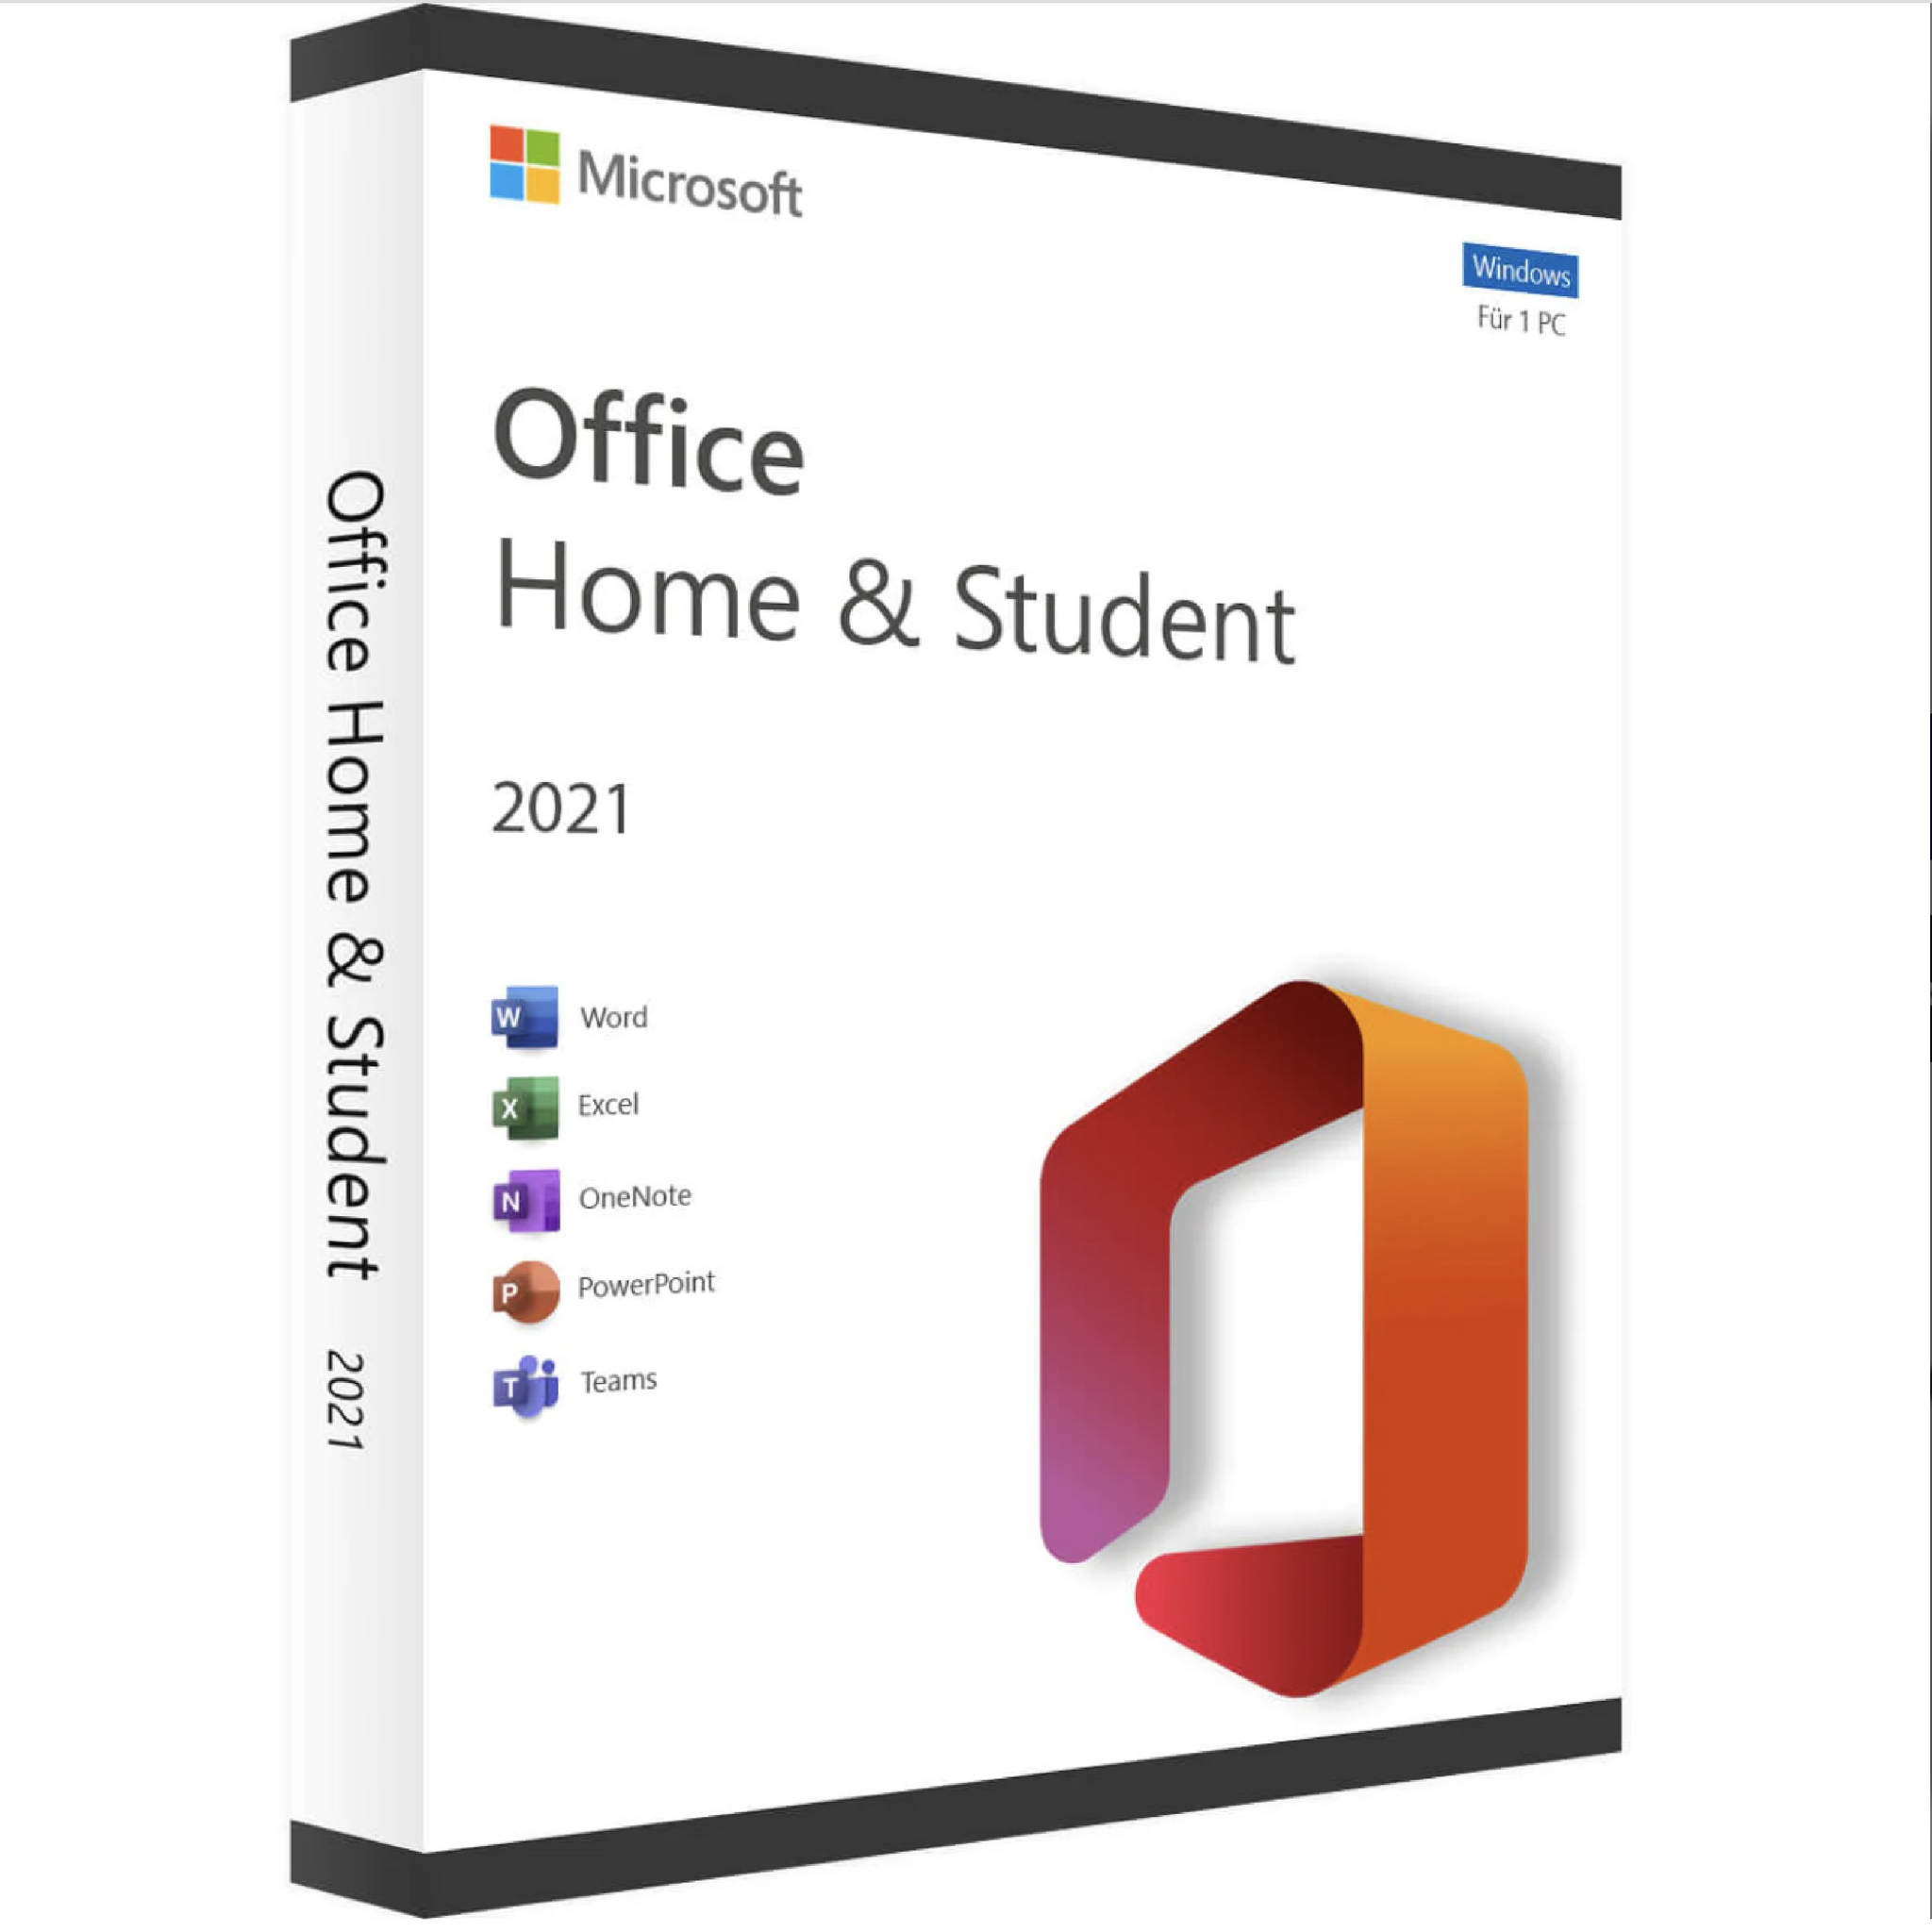 Microsoft Office 2021 Home and Student 2021 For Windows Device